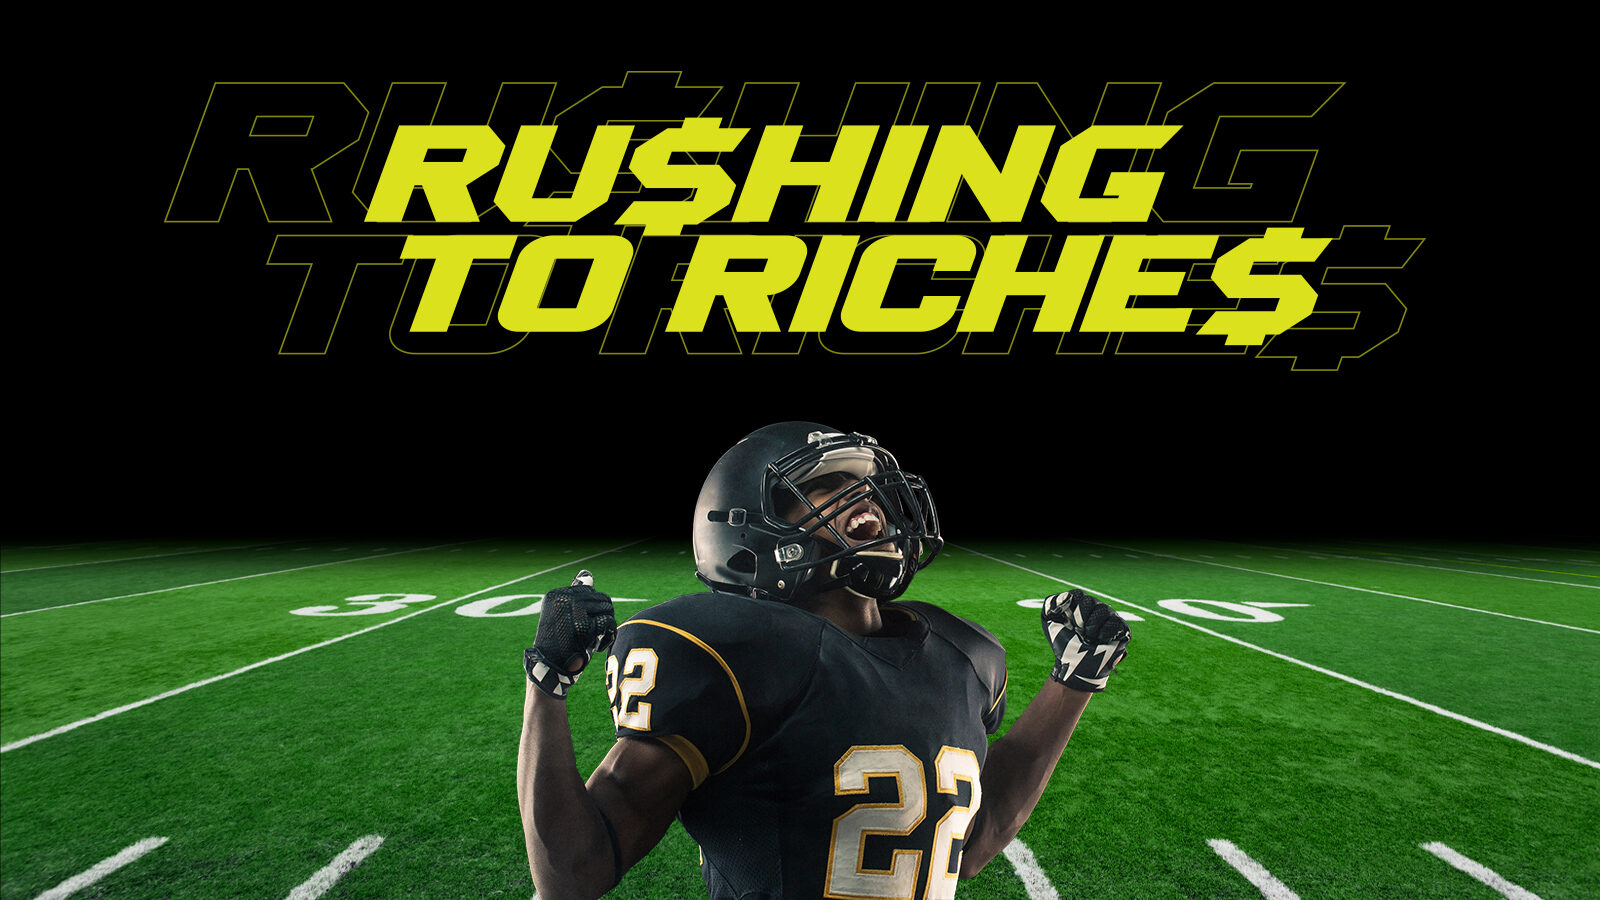 Rushing to Riches